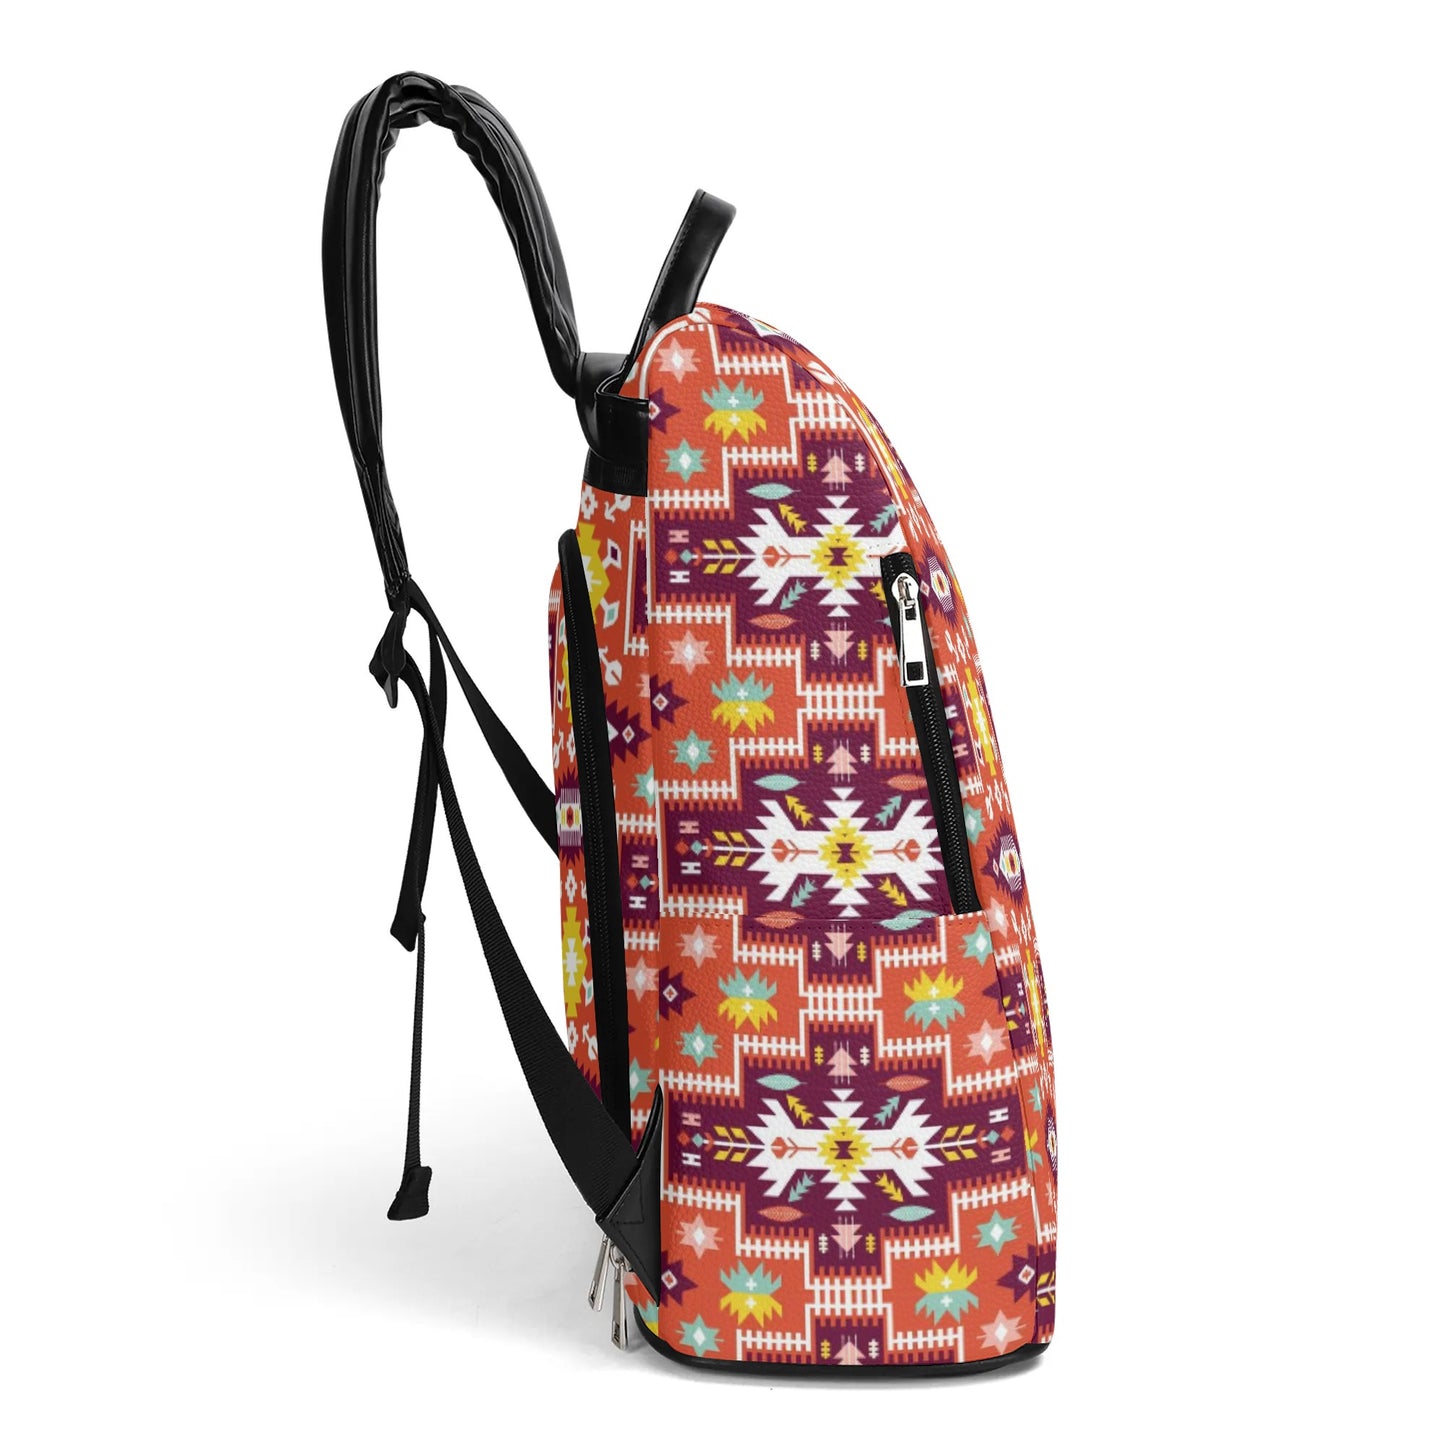 New Travel PU Daypack Anti-theft Backpack